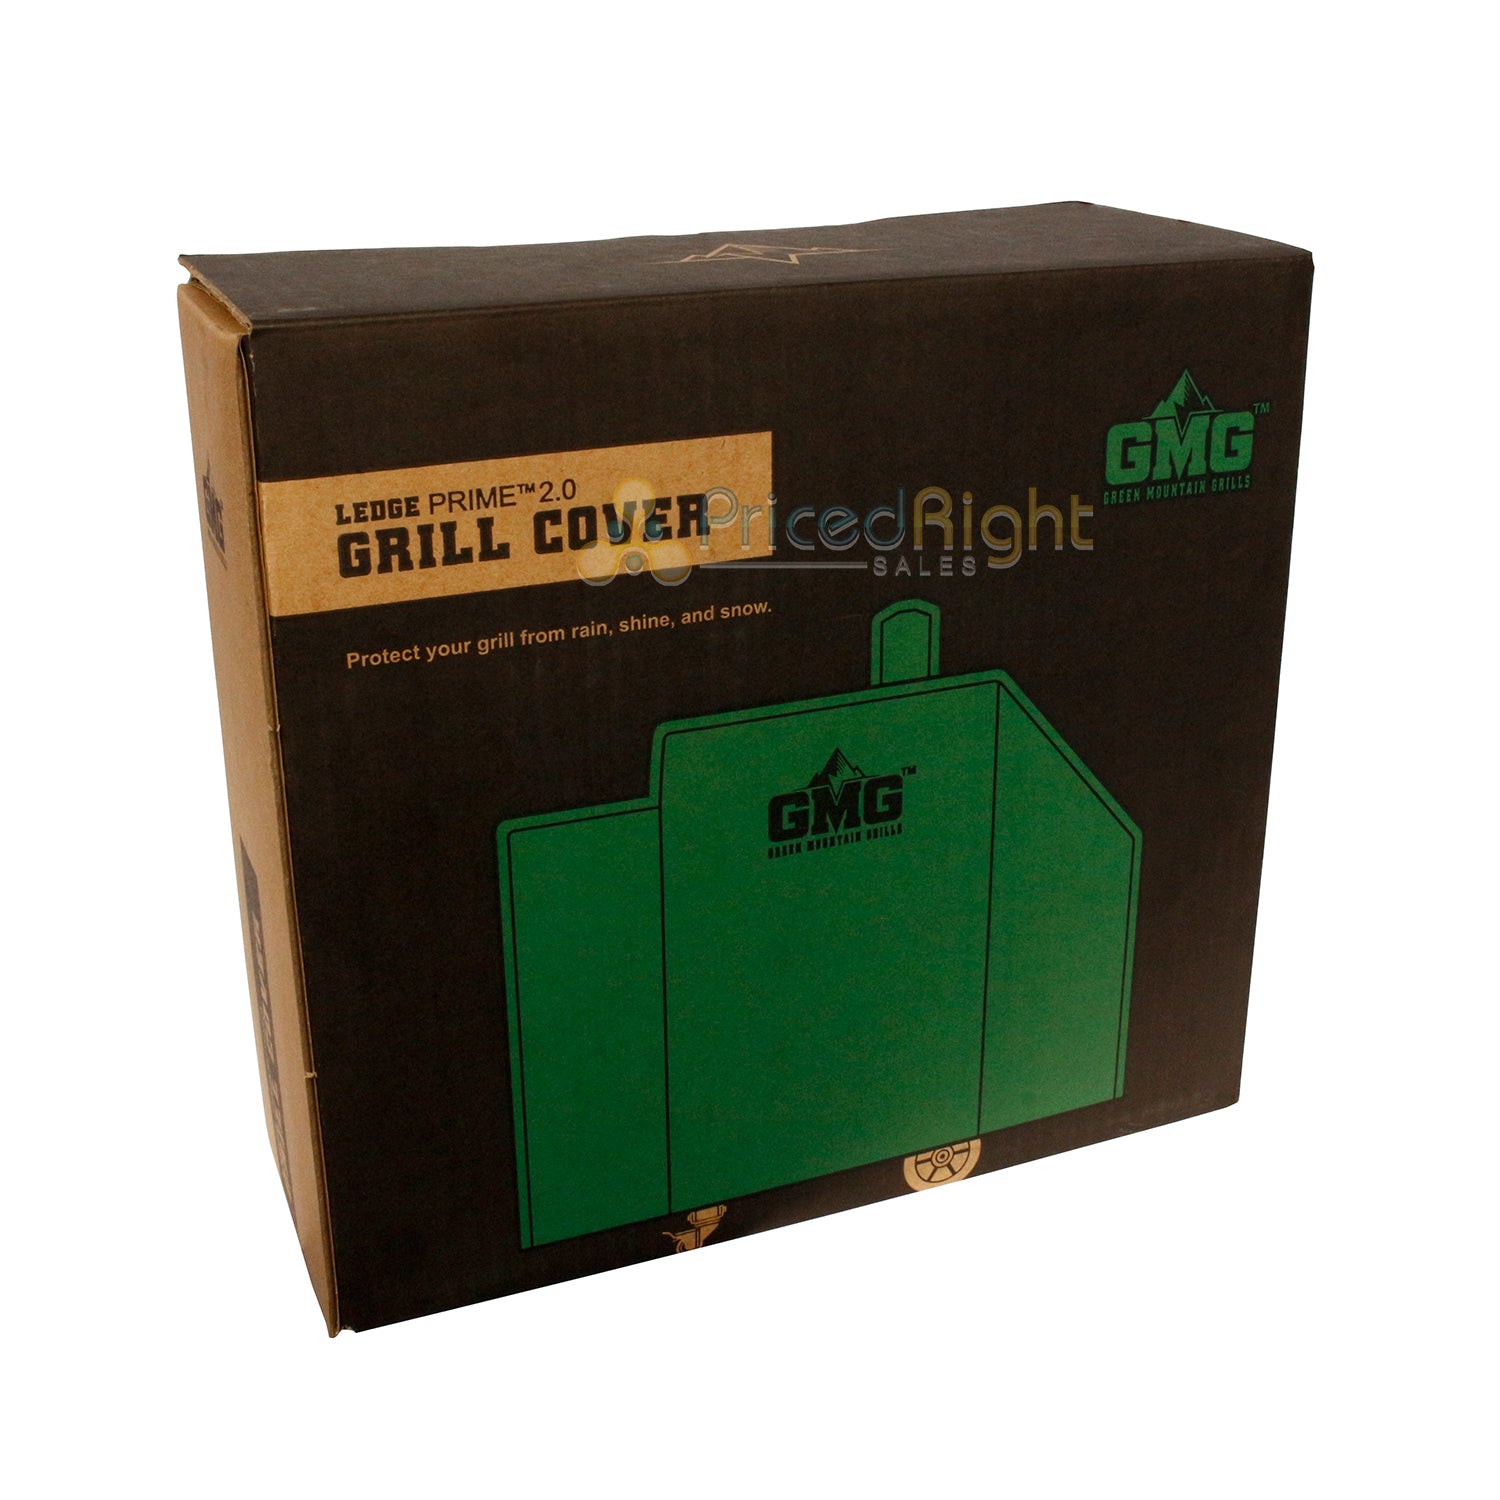 Green Mountain Grills Cover Ledge Prime & DB Choice Models Weather Resistant